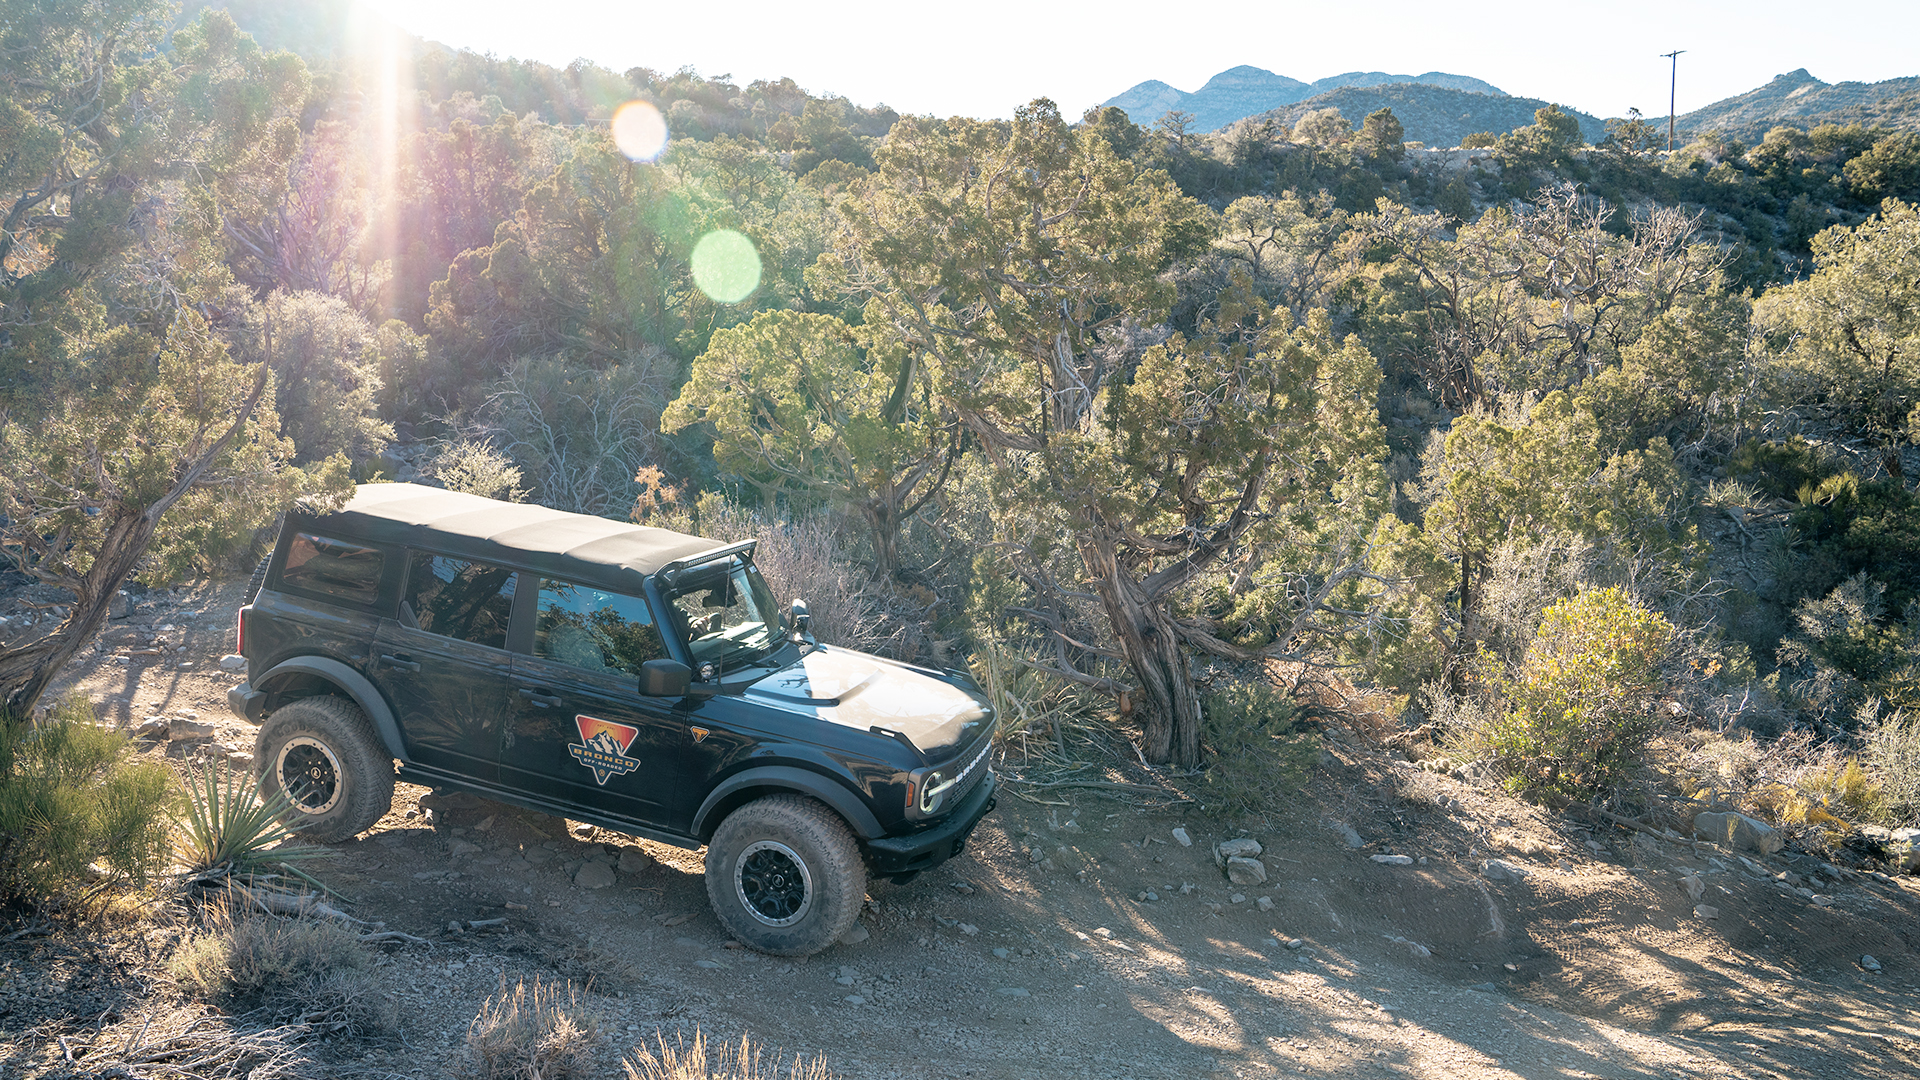 The Bronco can get you deep into the backcountry.